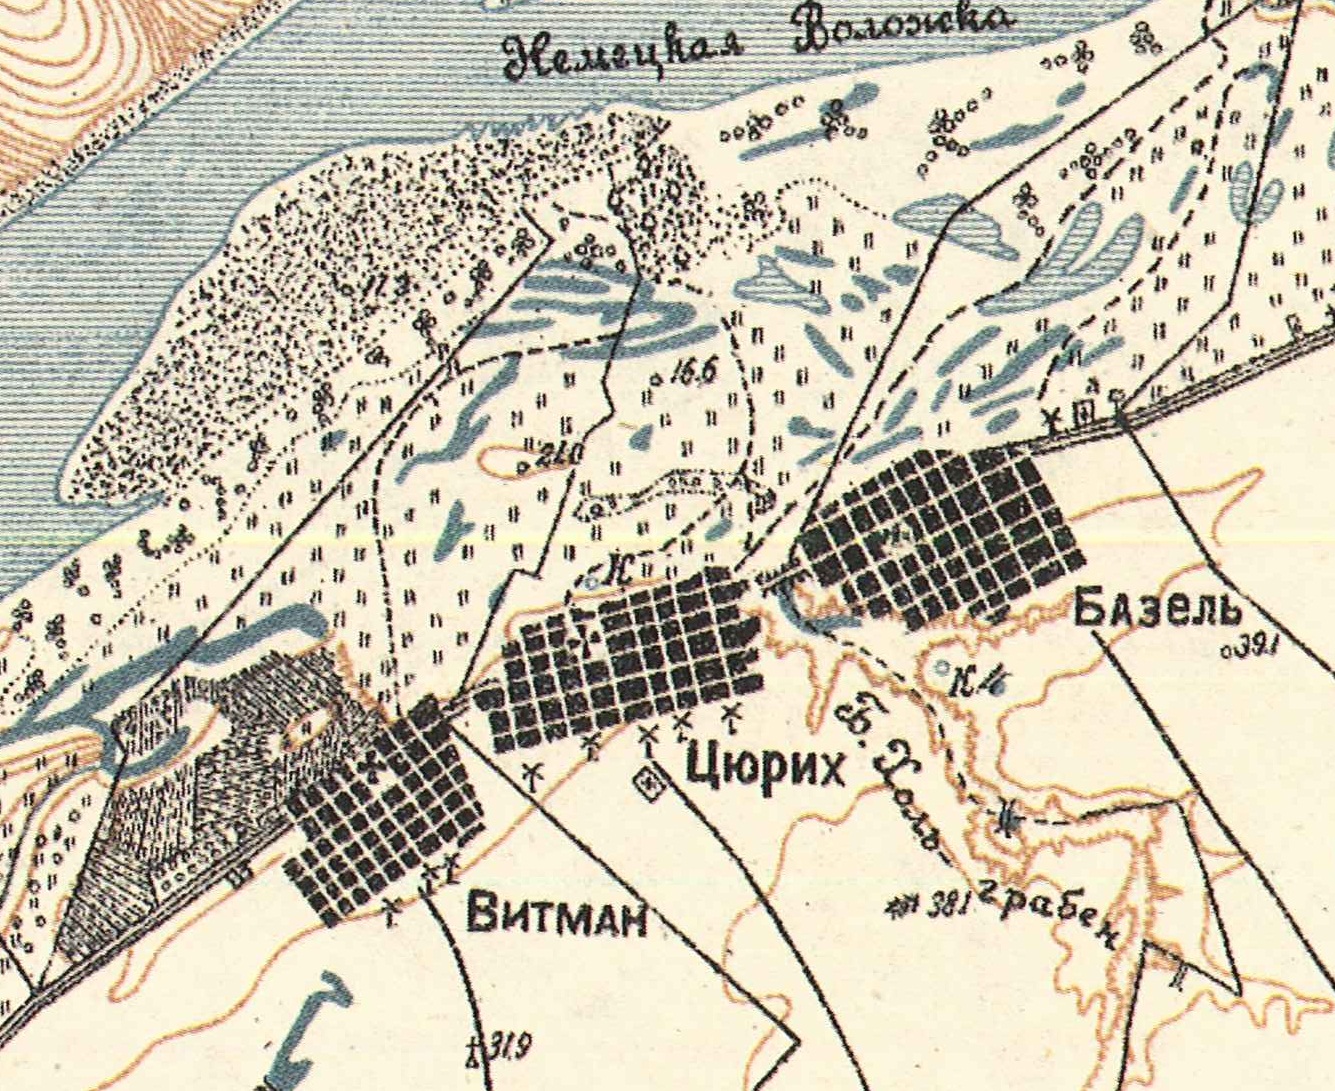 Map showing Wittmann on the left (1935).